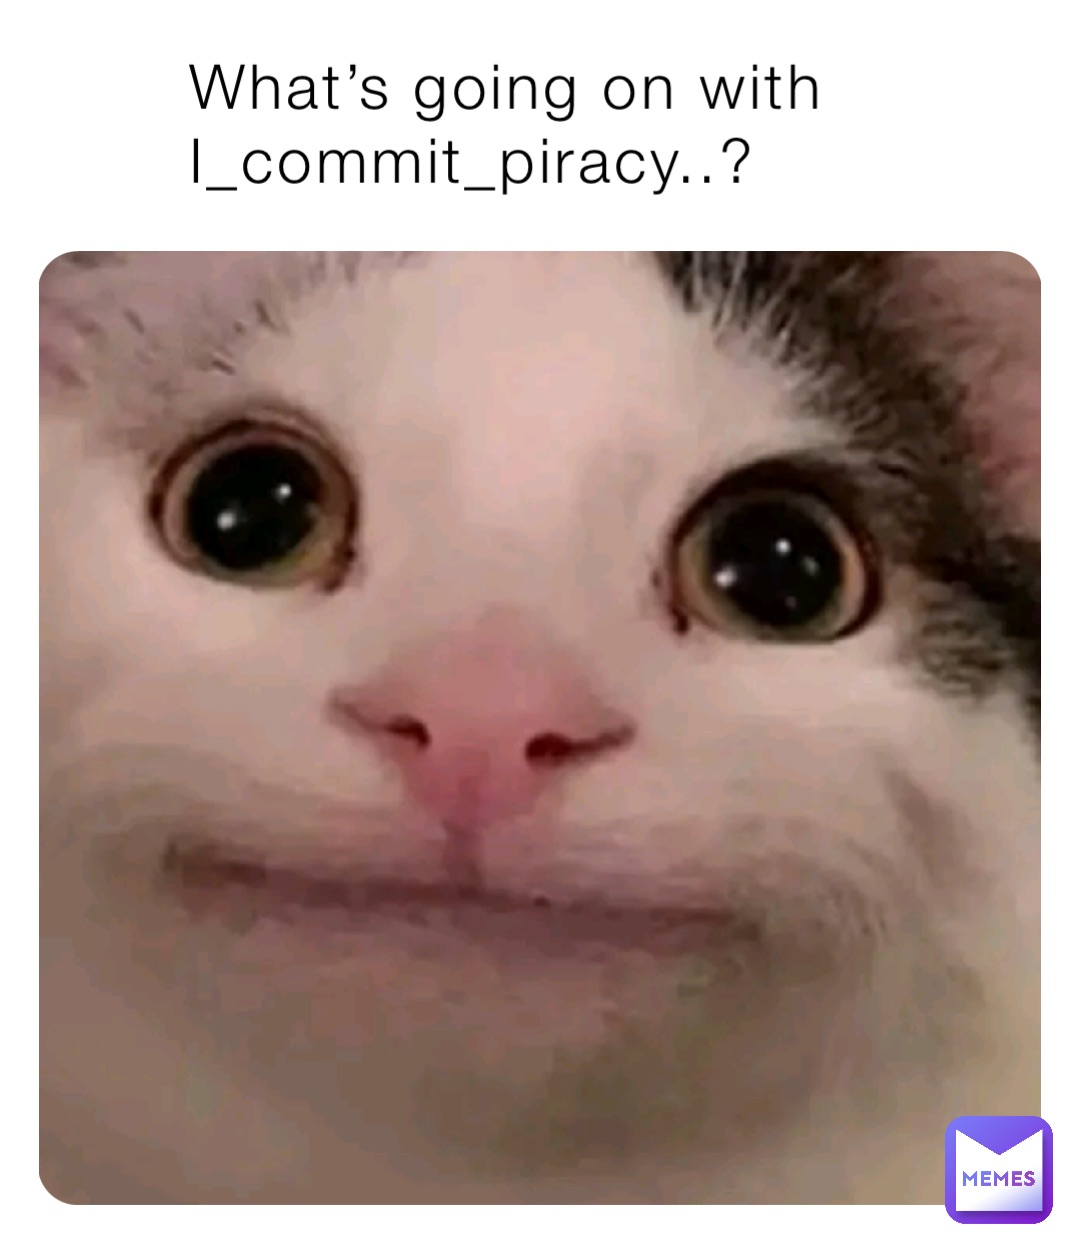 What’s going on with I_commit_piracy..?